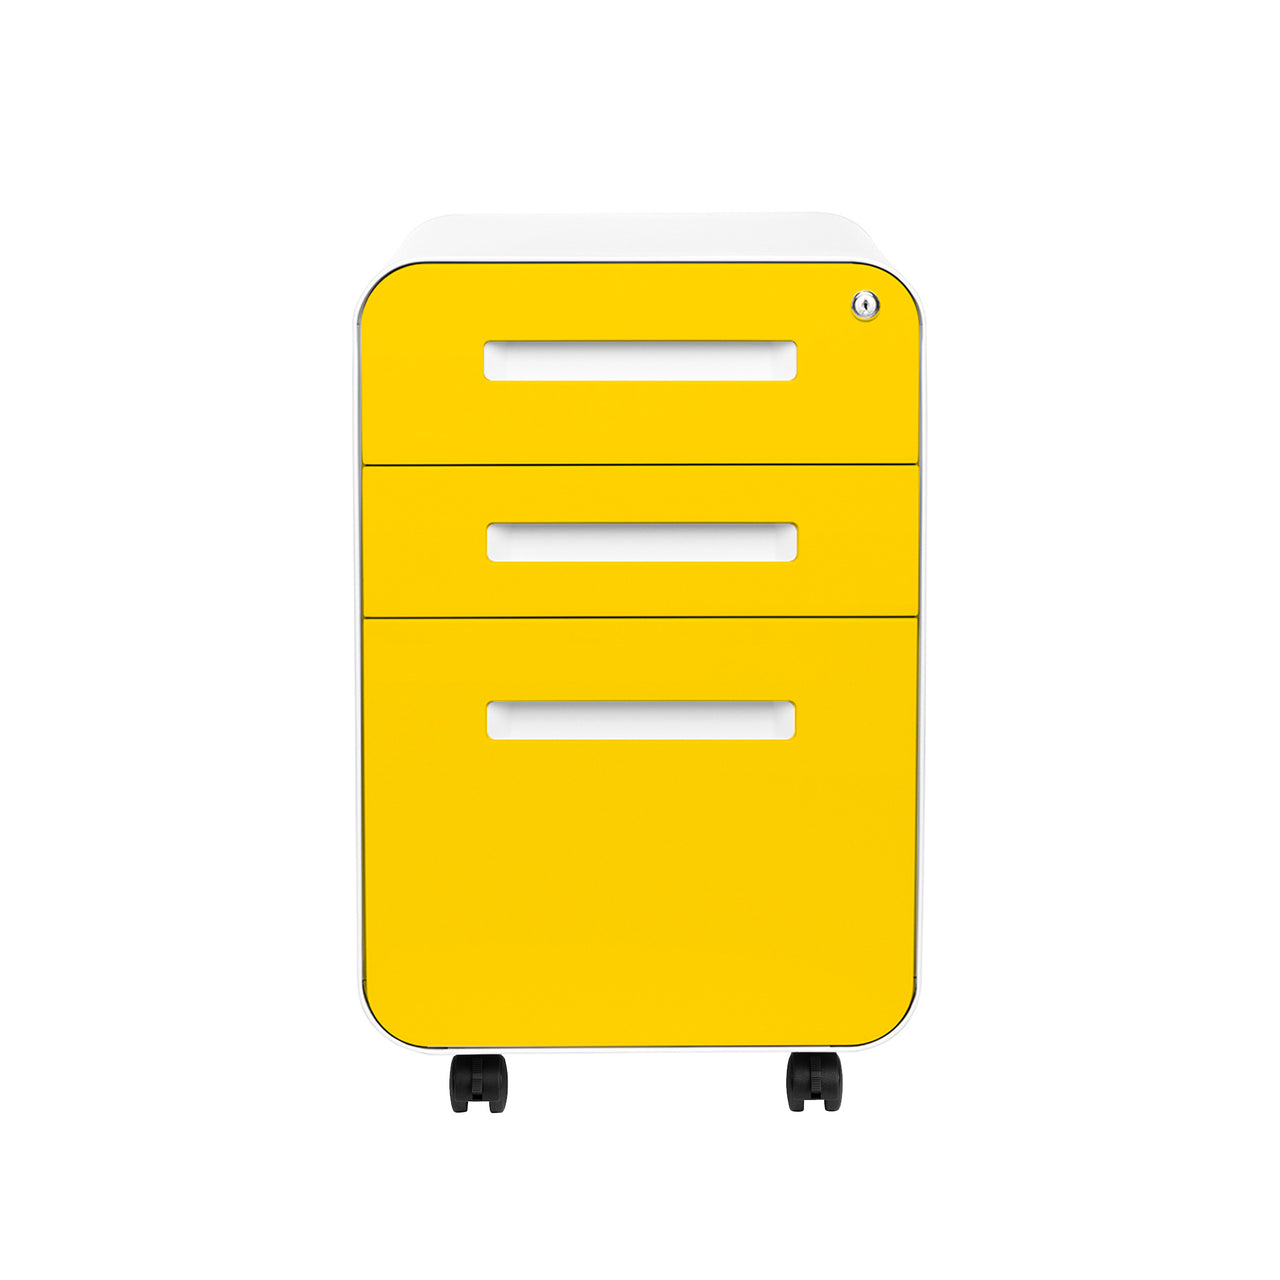 Stockpile Curve File Cabinet (Yellow Faceplate)